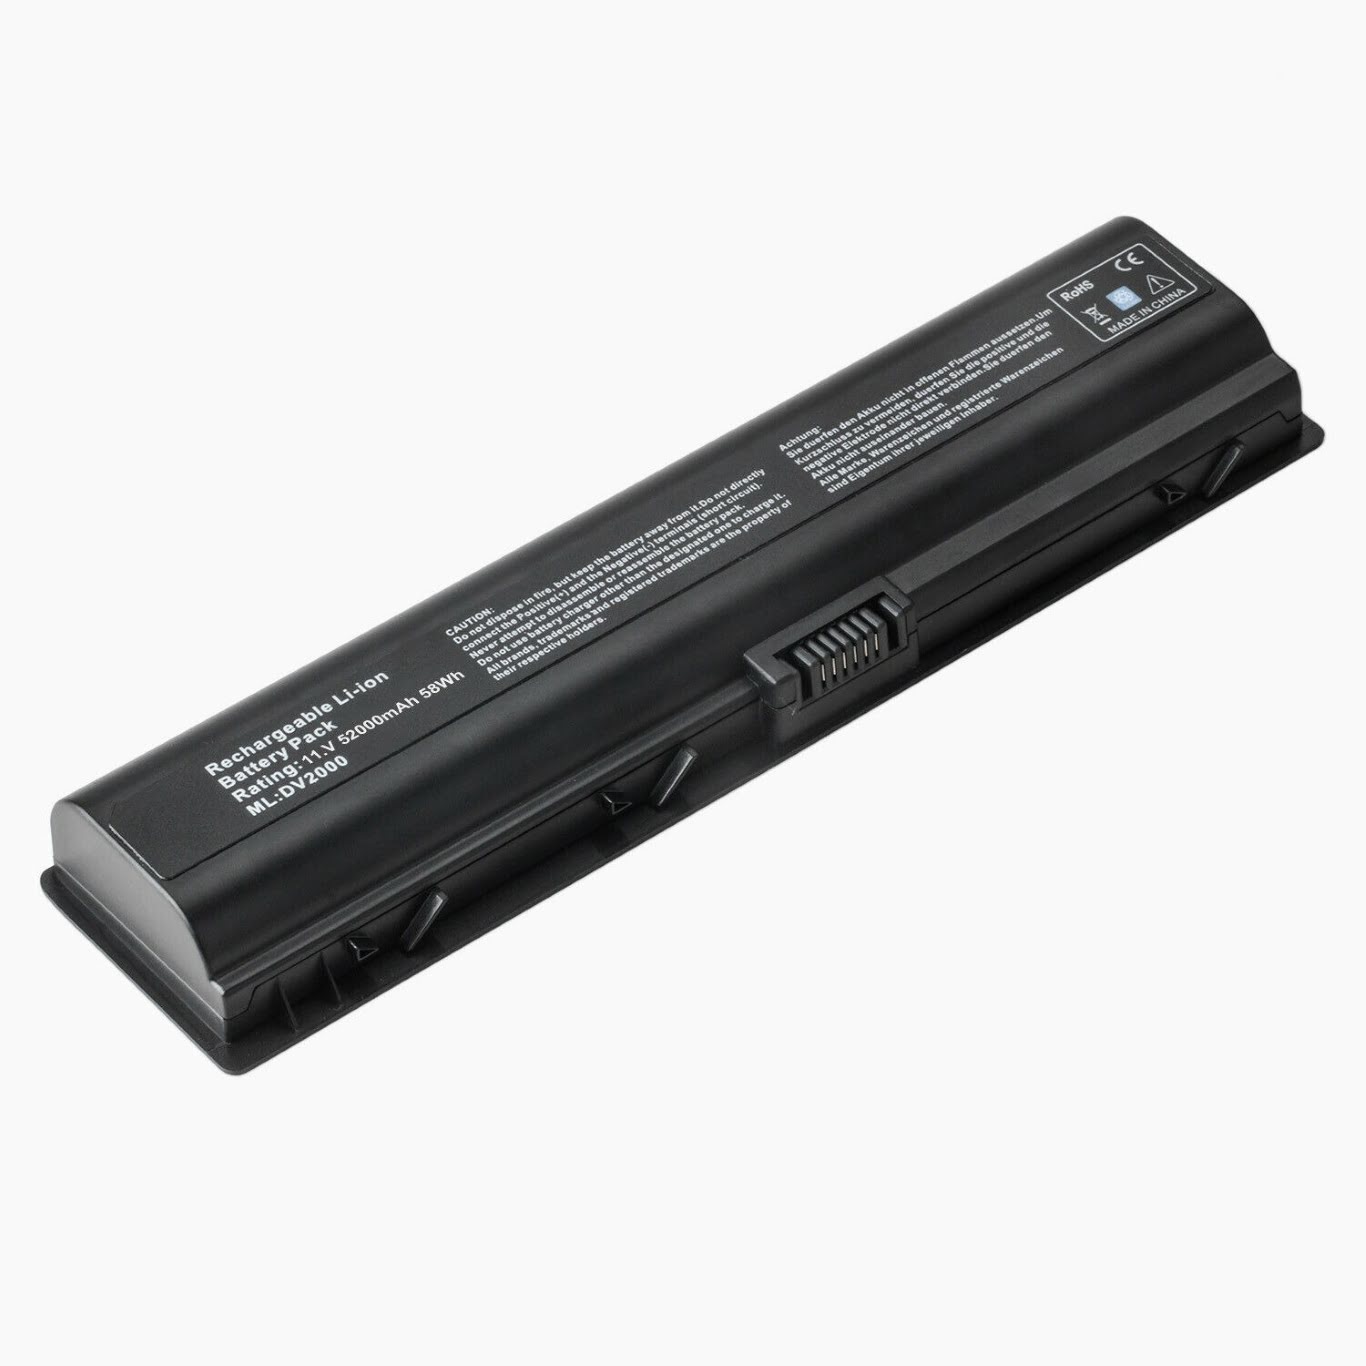 411462-121, 411462-141 replacement Laptop Battery for HP 6000XX, G6000, 6 cells, 10.8V, 4400mAh